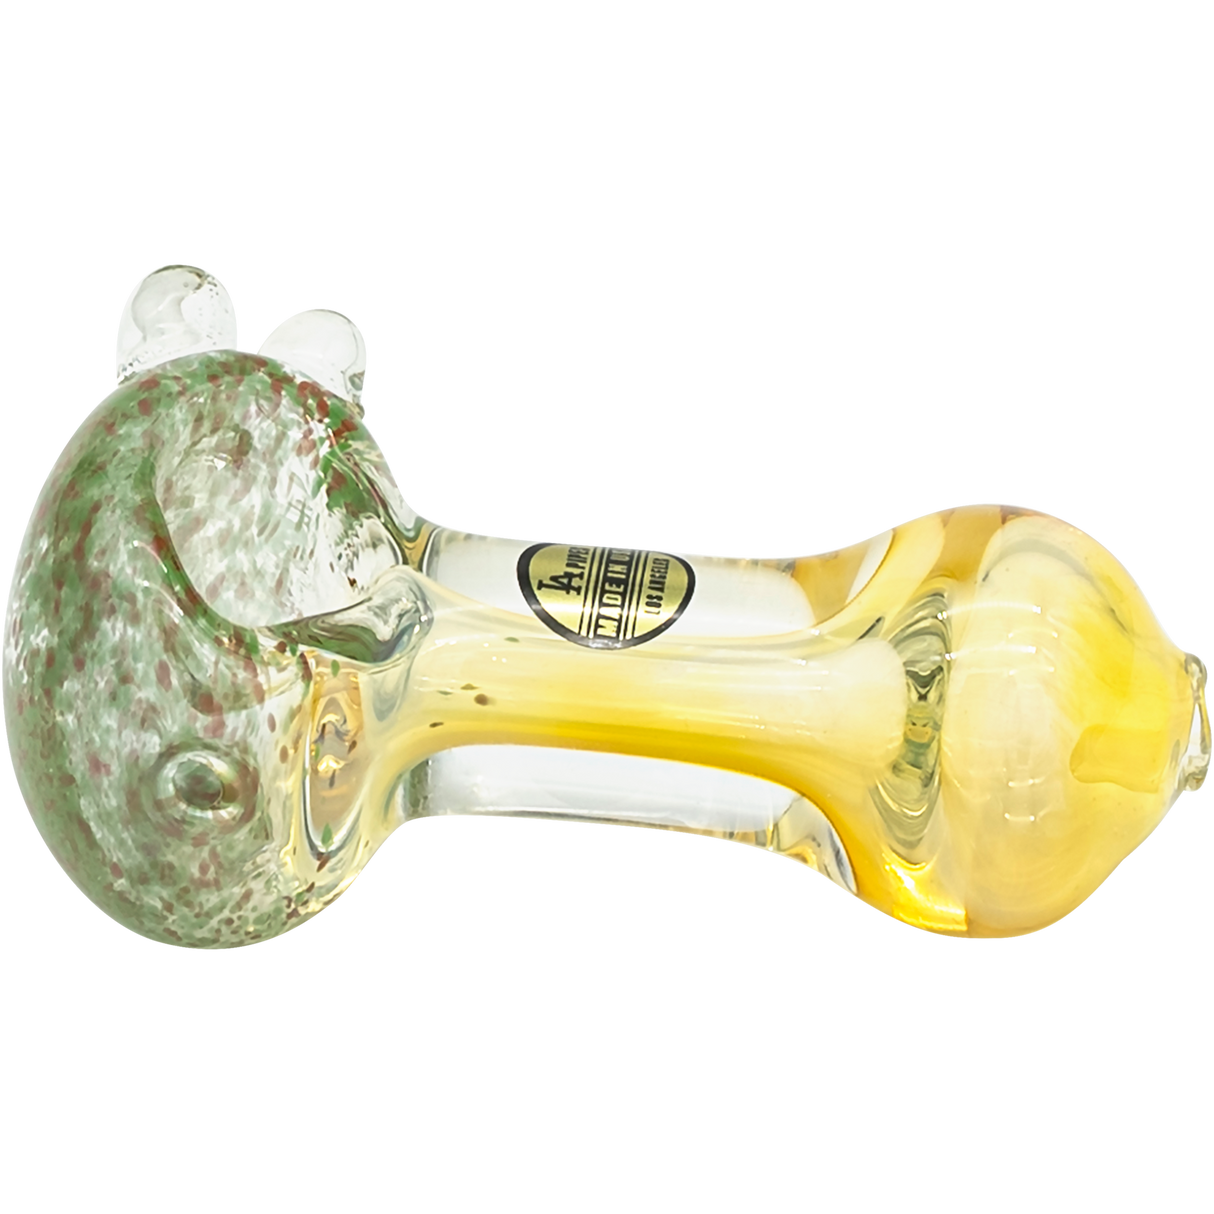 LA Pipes Thick Neck Freckles Spoon Pipe, 3.75" Heavy Wall Borosilicate, Side View